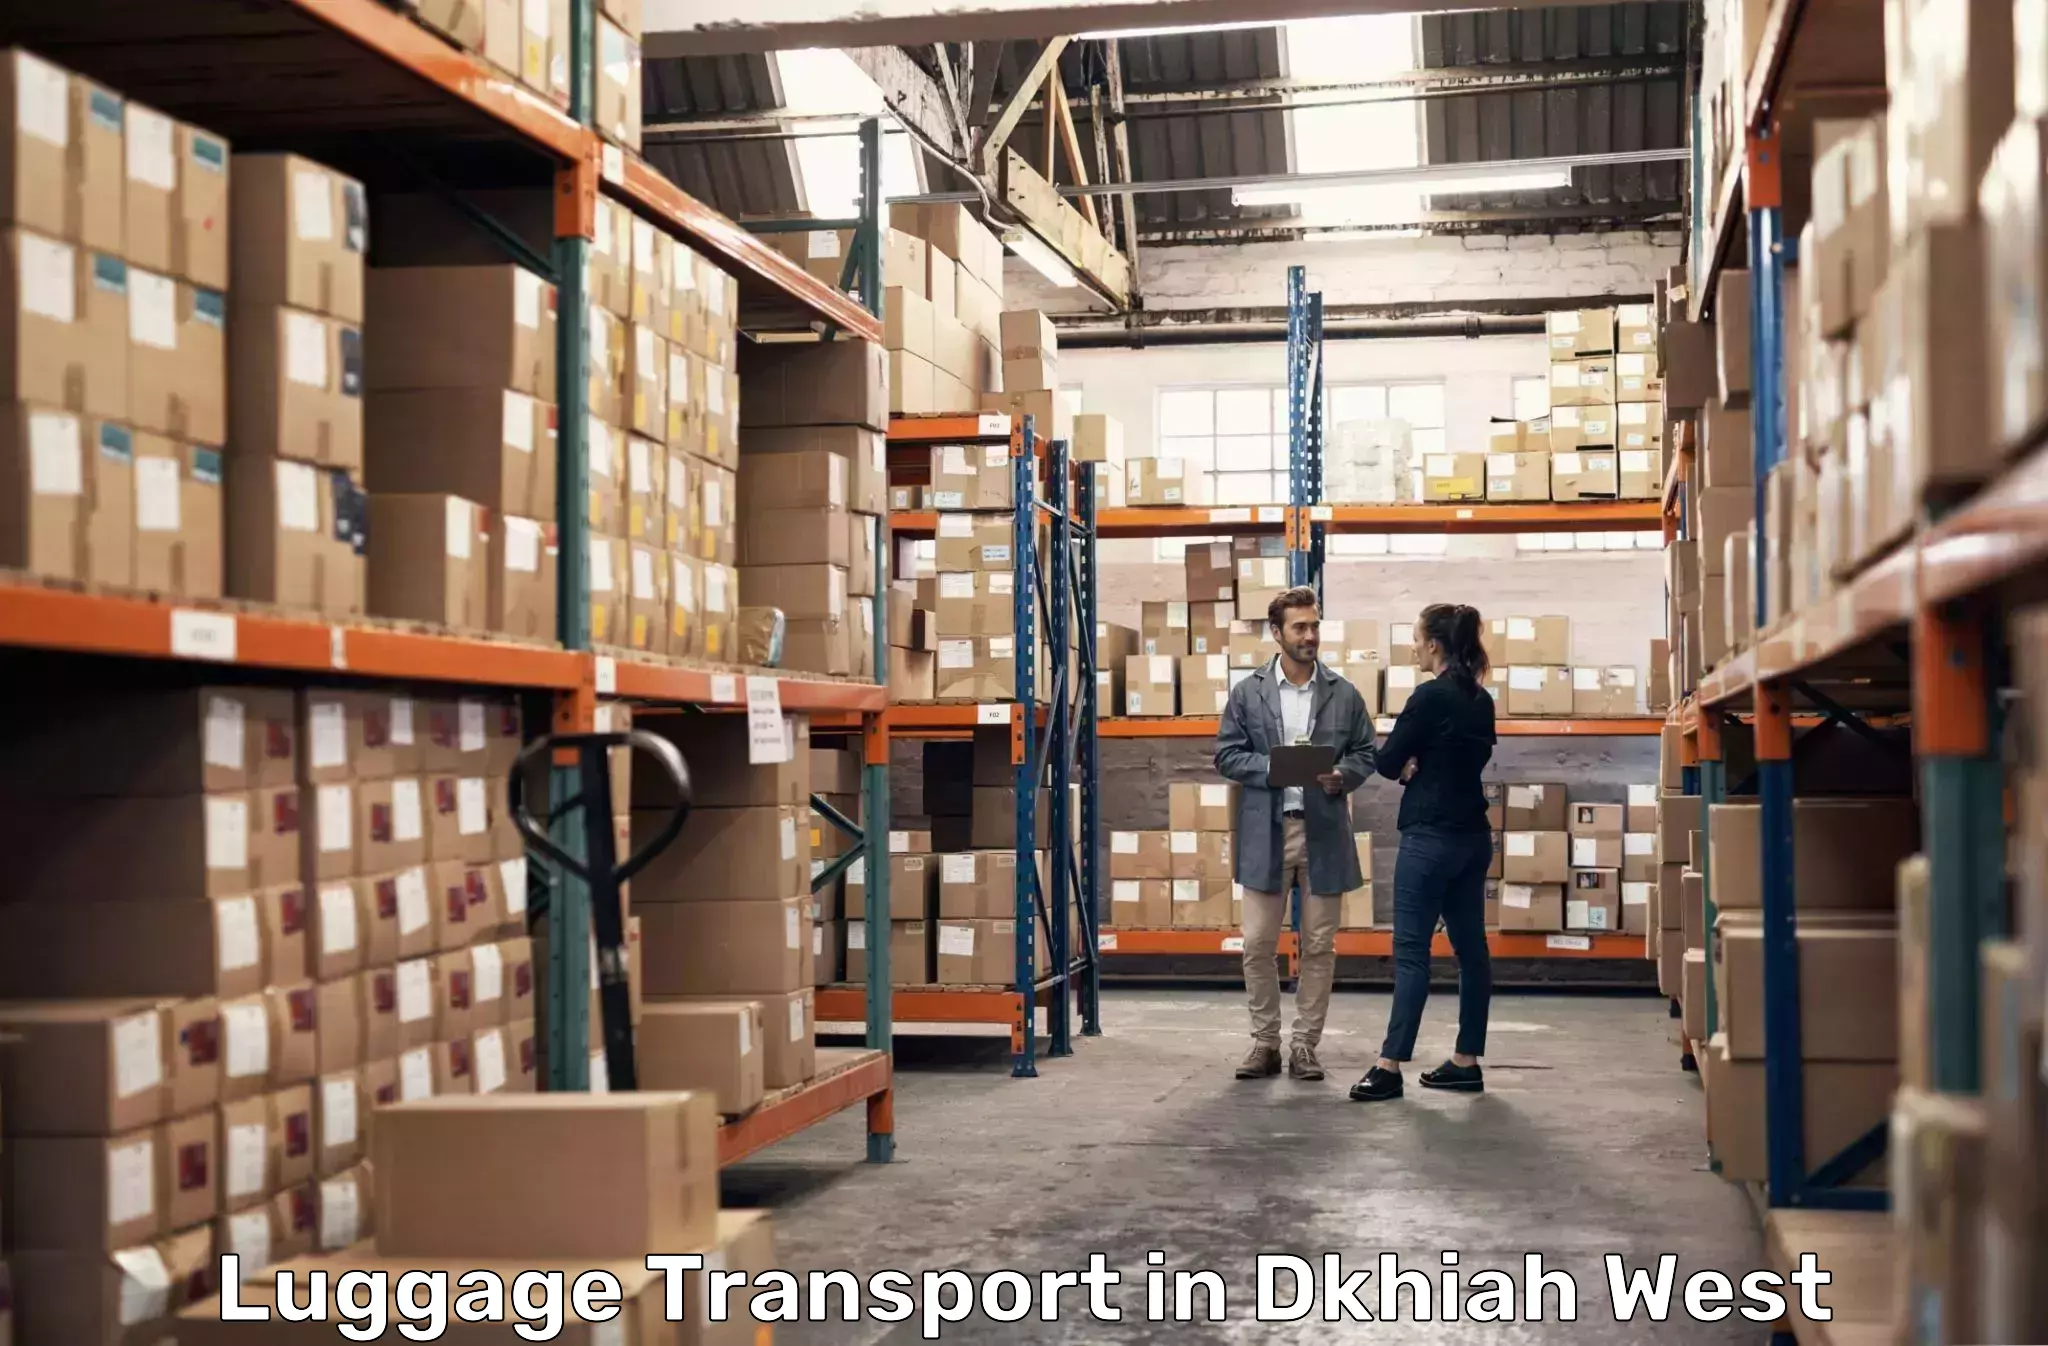 Luggage shipment strategy in Dkhiah West